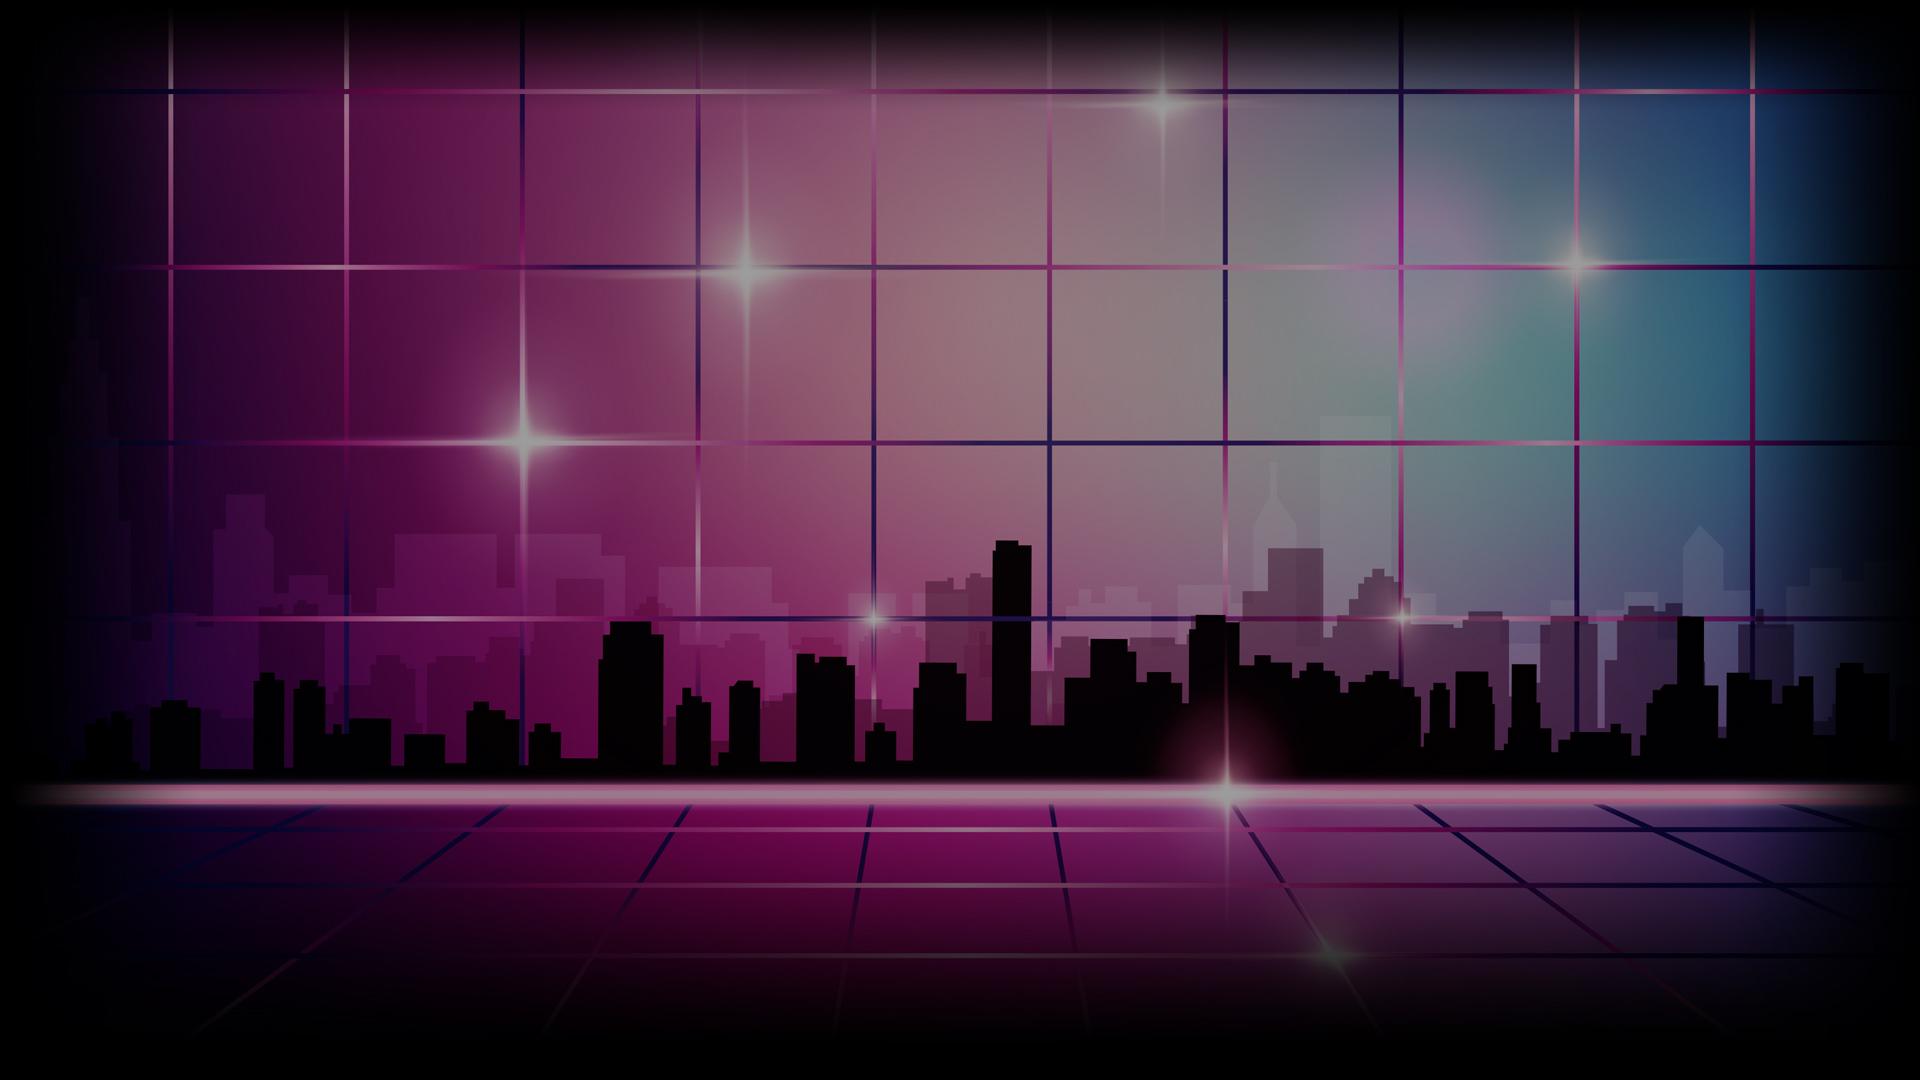 Vaporwave Steam Backgrounds - Disco Party Background Vector - HD Wallpaper 